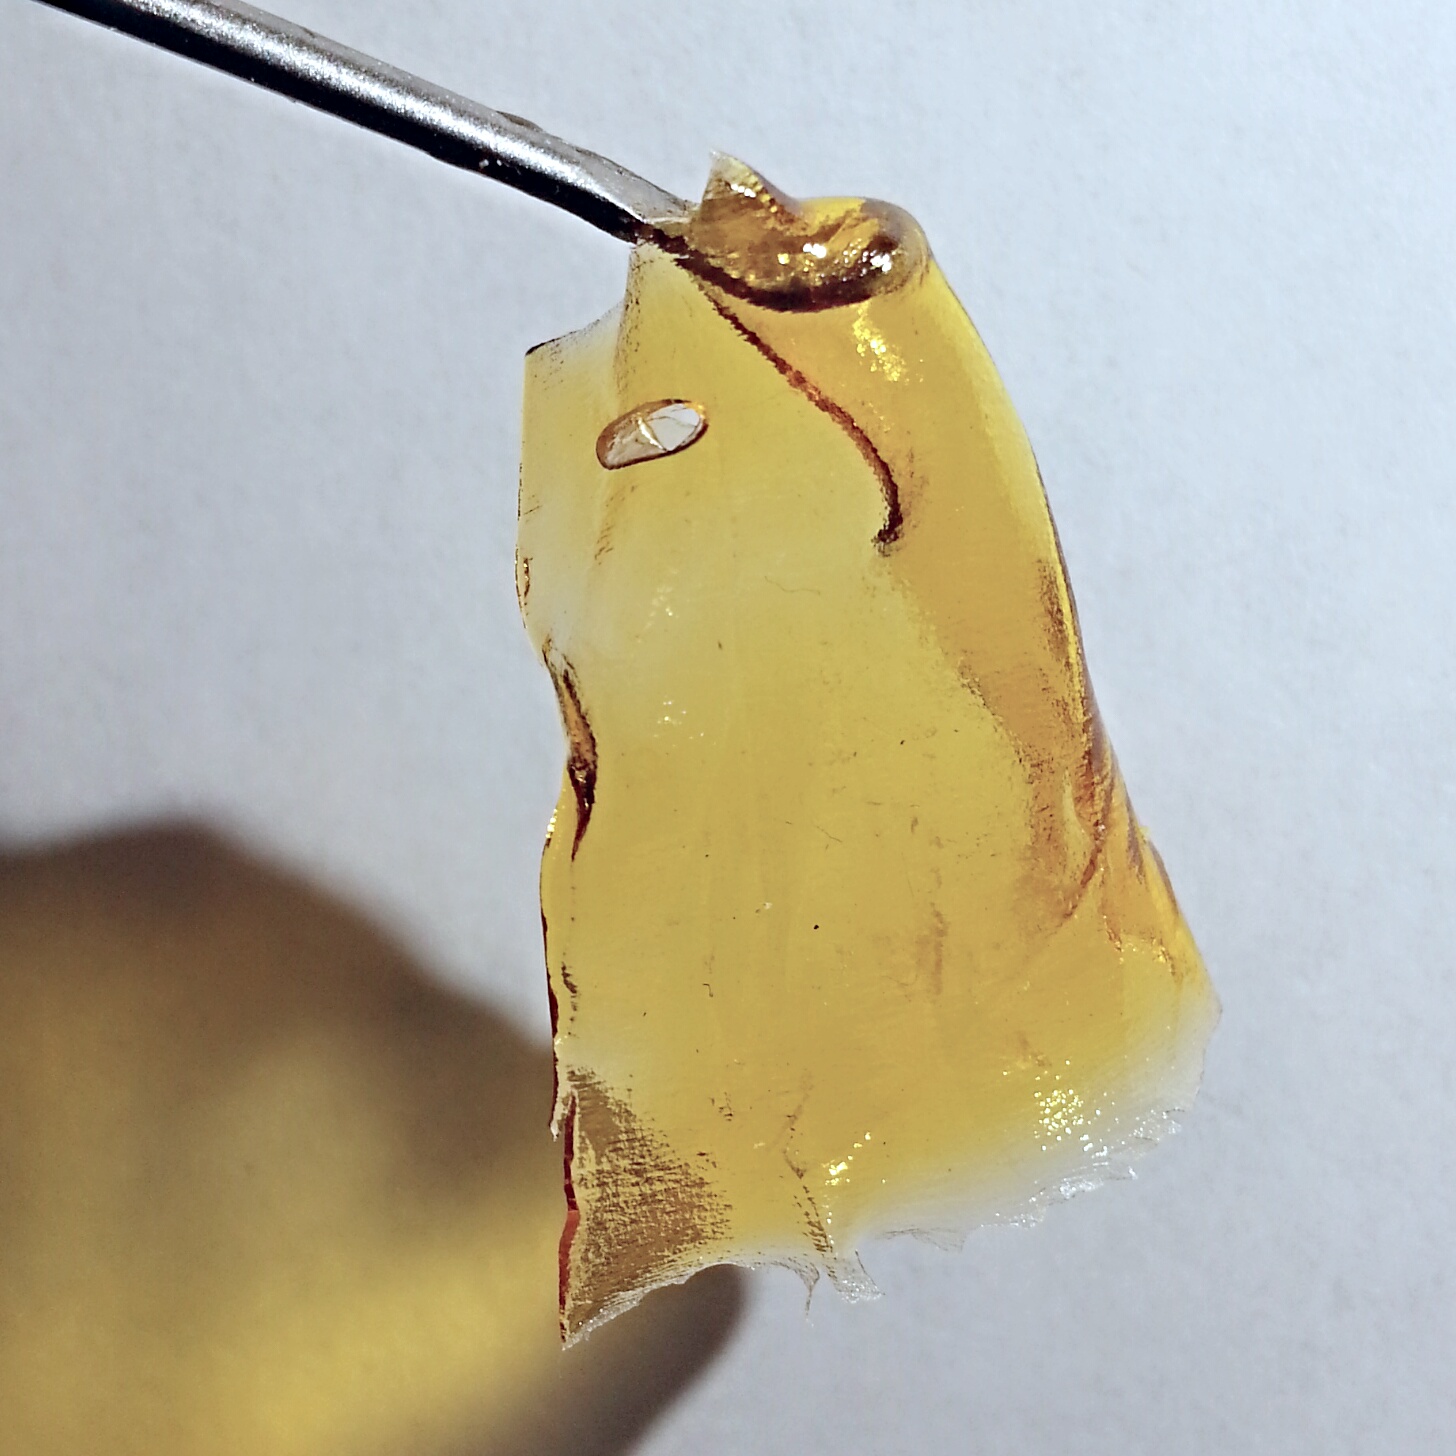 Lavender OG Shatter from Second Story Concentrate Review